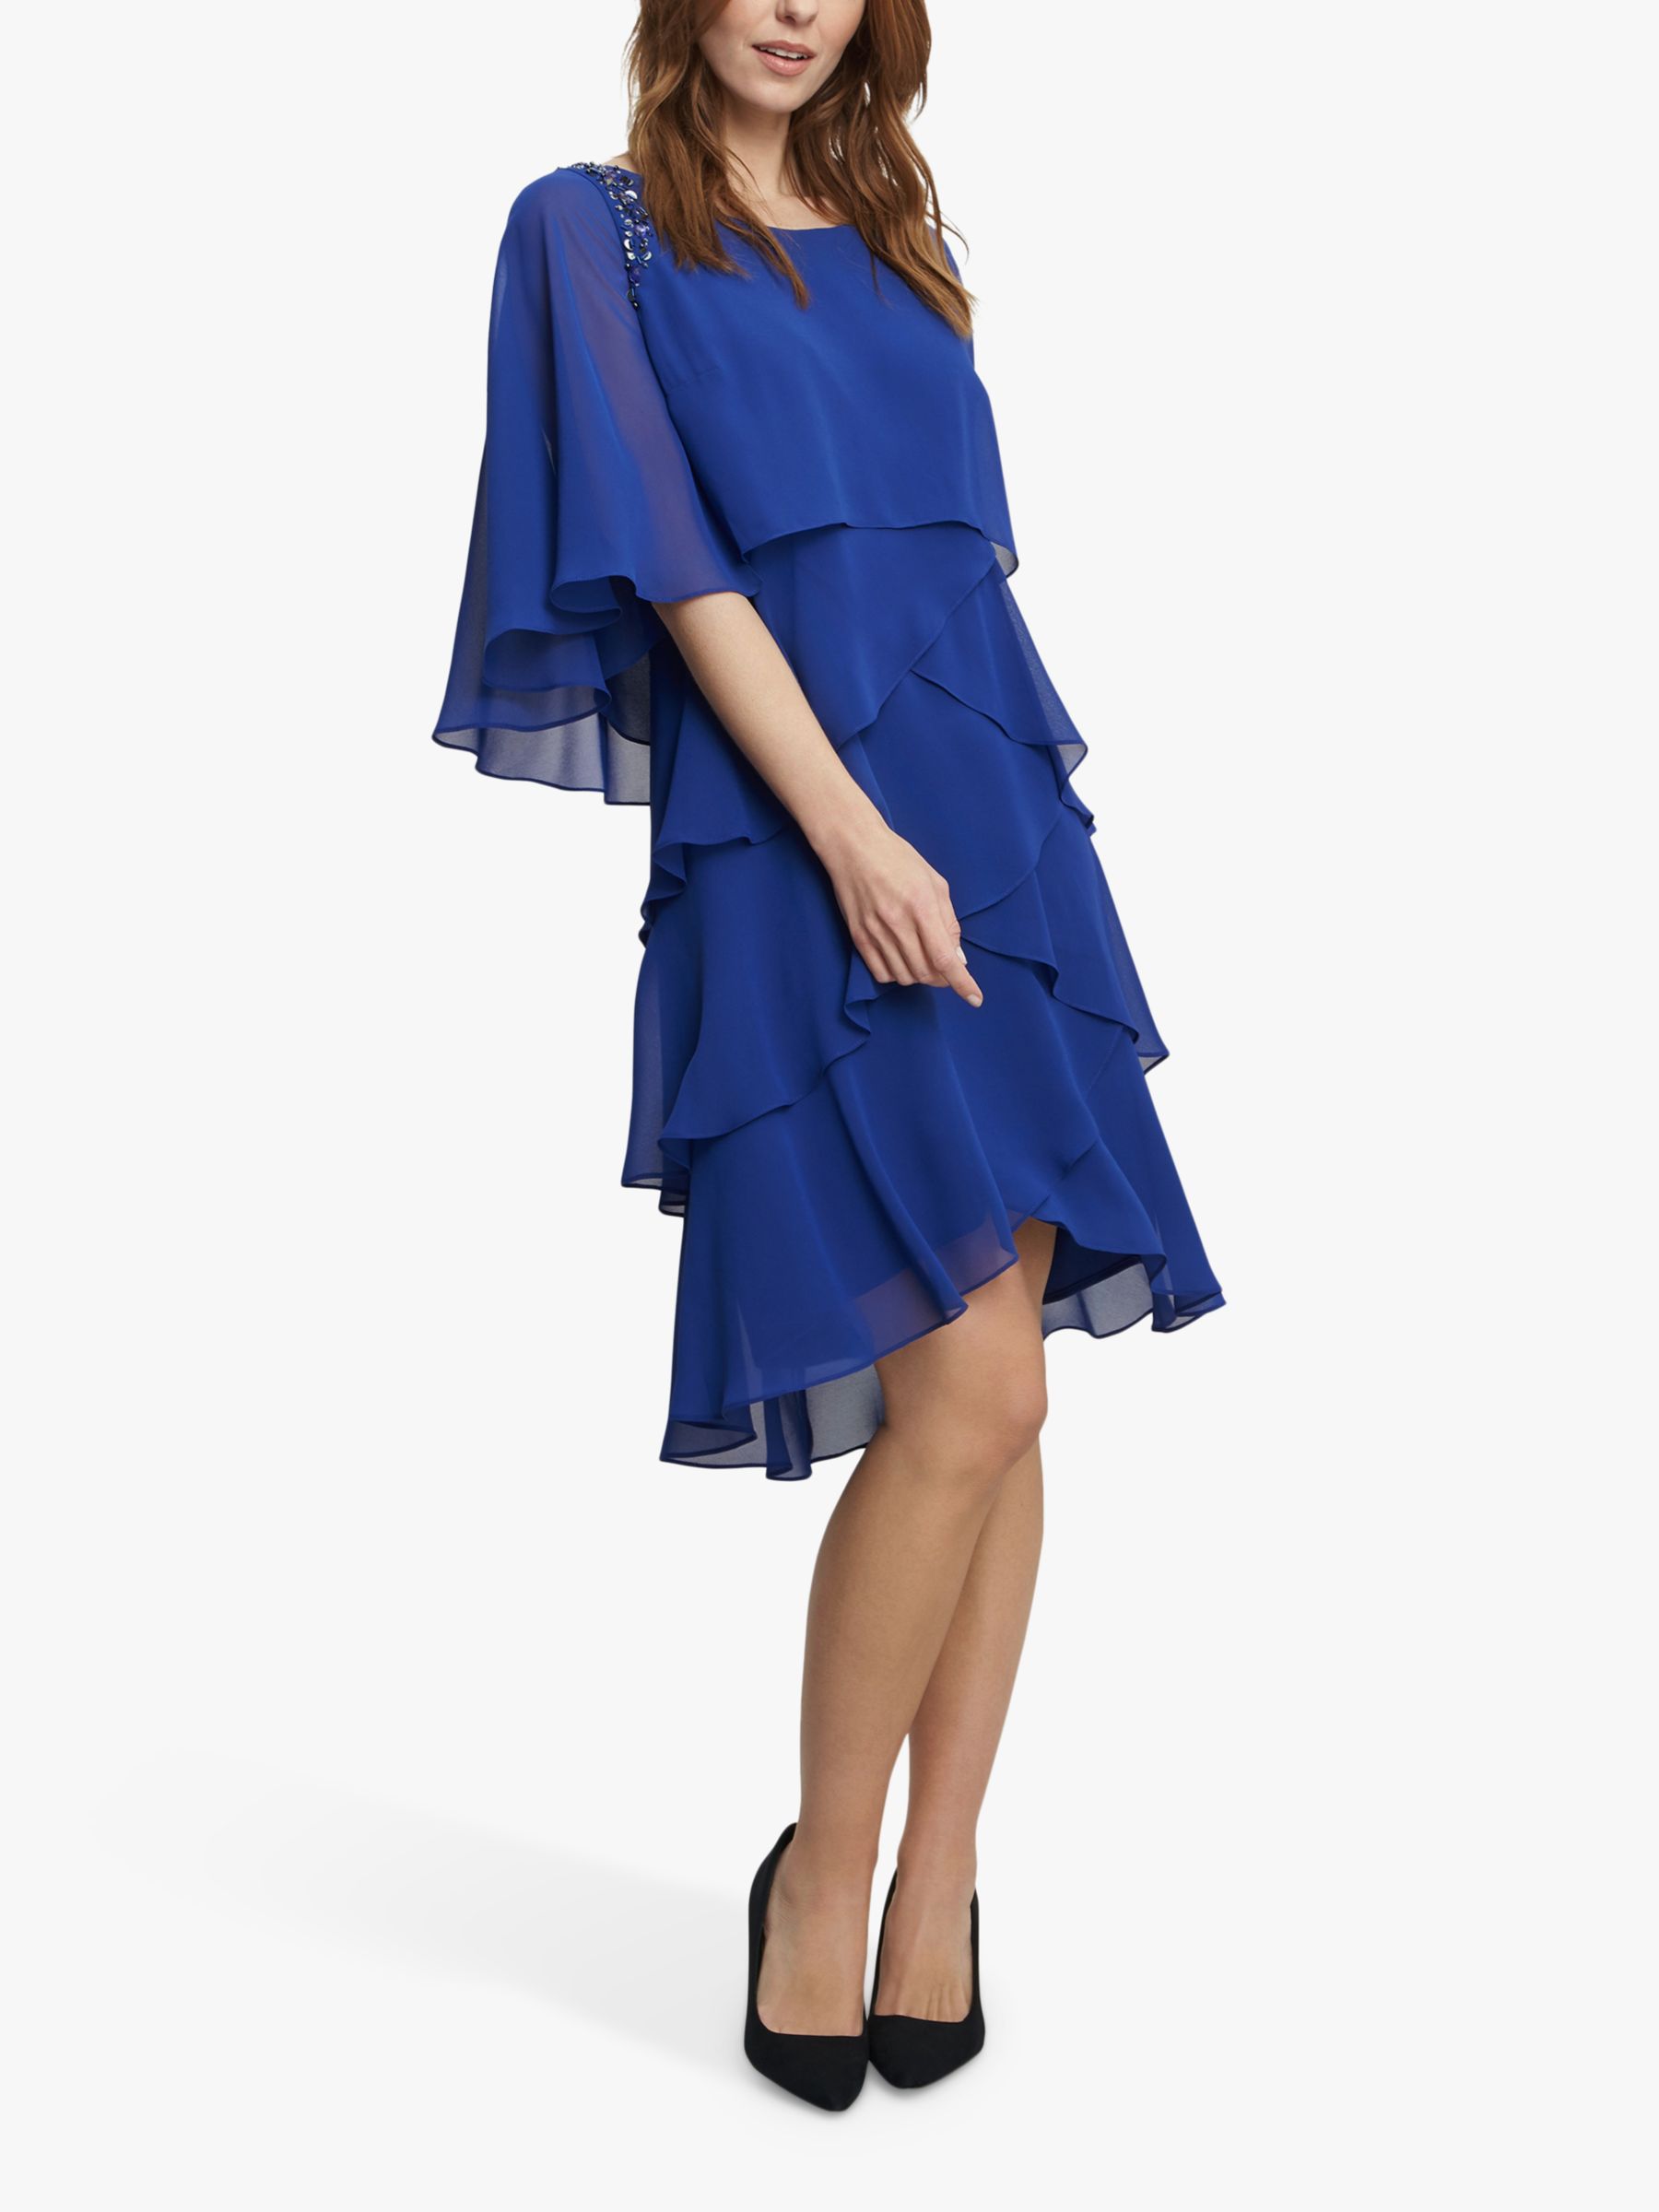 Buy Gina Bacconi Via Beaded Cape Tiered Dress, Royal Blue Online at johnlewis.com